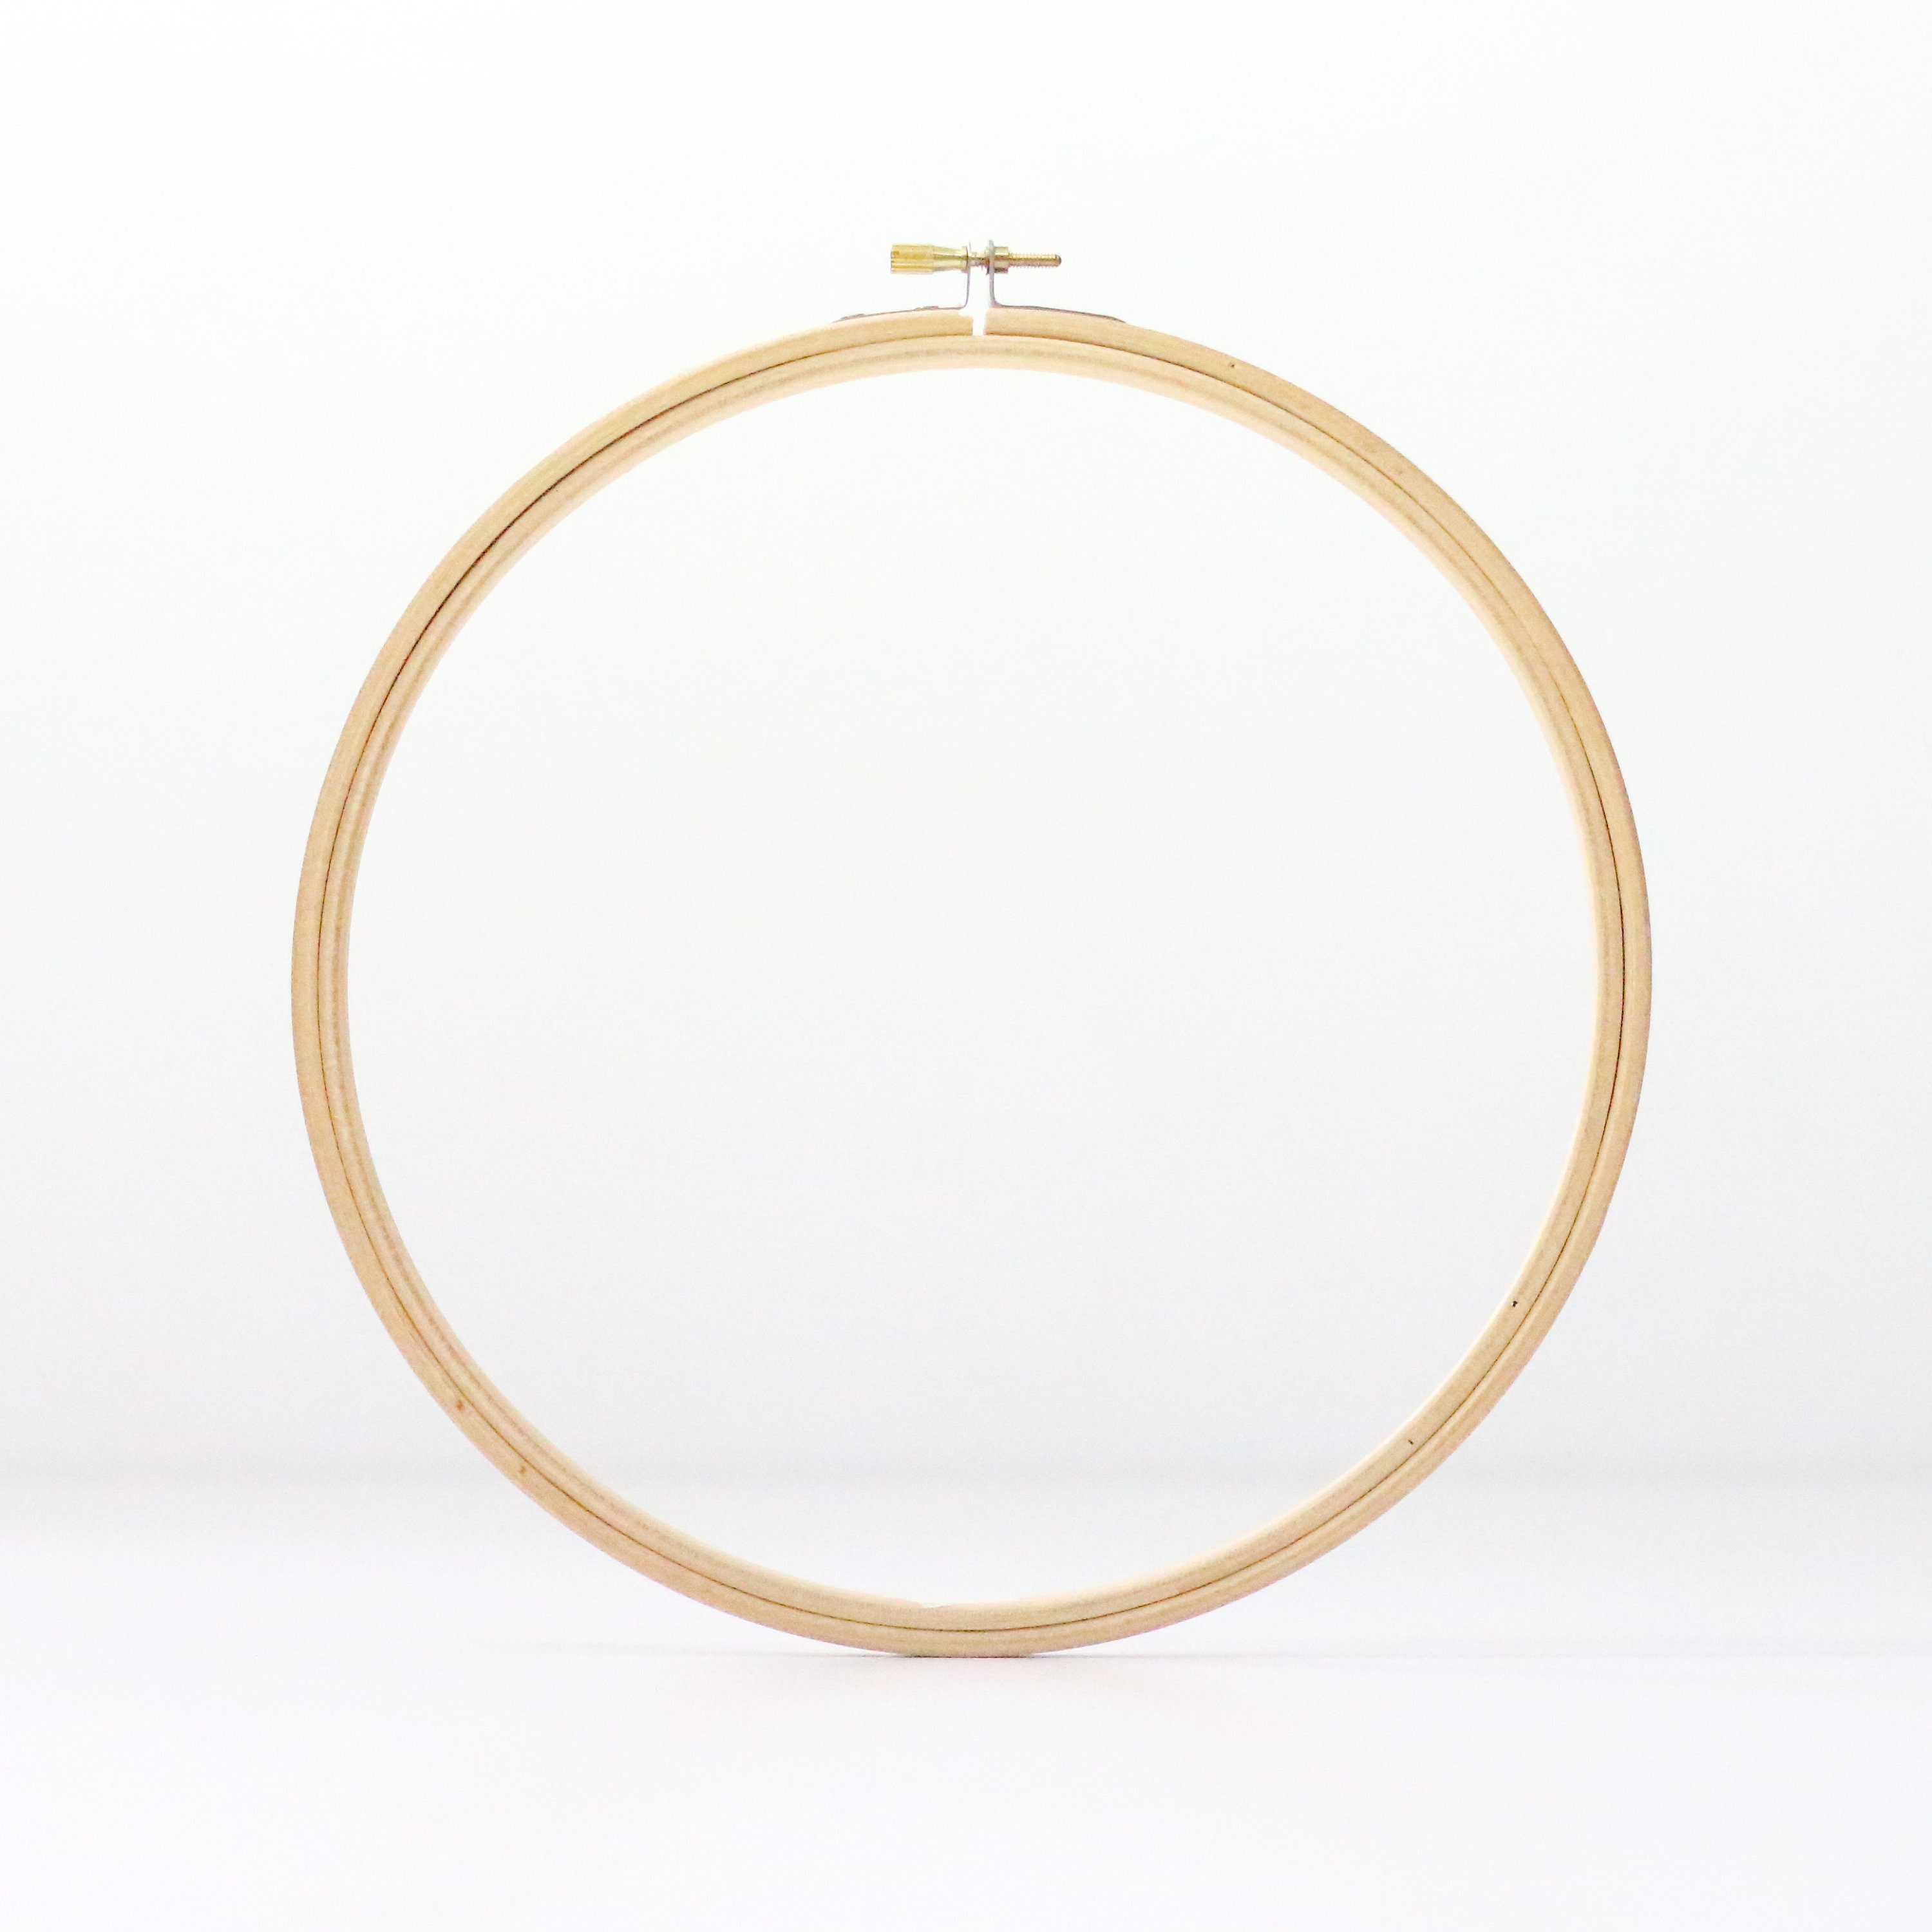 12 Inch Wooden Embroidery Hoop. Embroidery Frame. Cross Stitch Hoop 